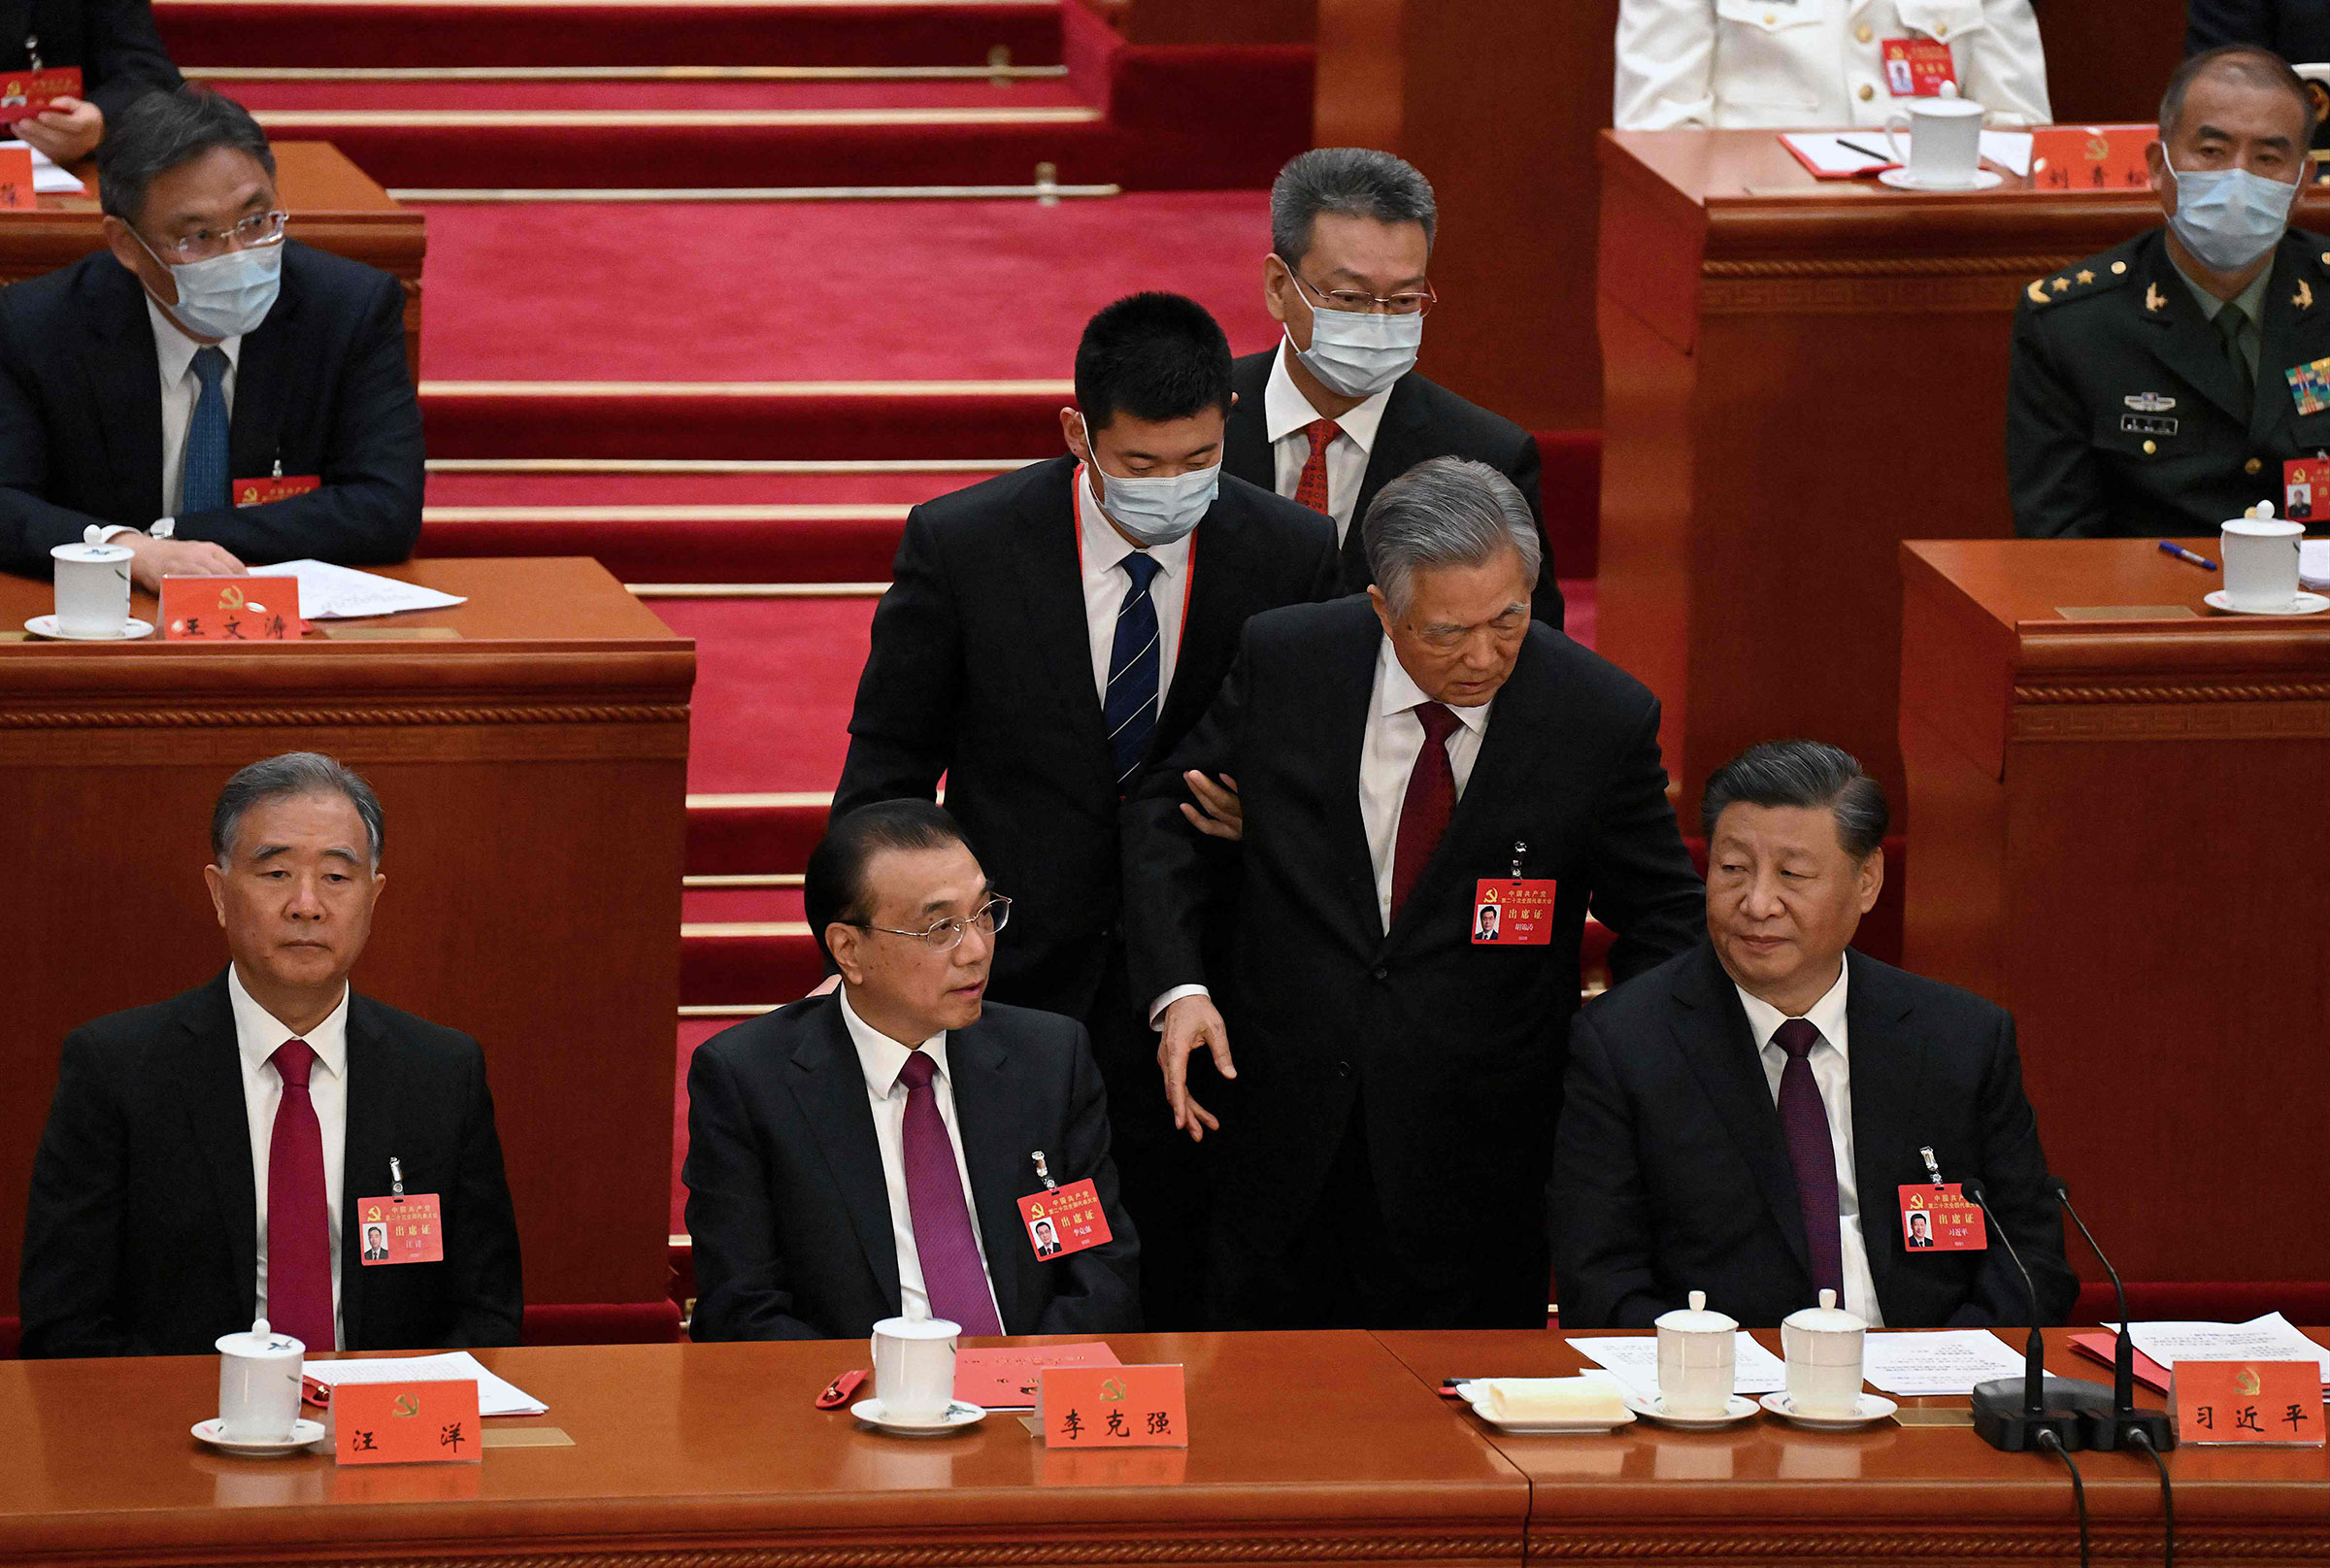 China's President Xi Jinping sits besides Premier Li Keqiang as former president Hu Jintao is assisted to leave from the closing ceremony of the 20th China's Communist Party's Congress at the Great Hall of the People in Beijing on Oct. 22.